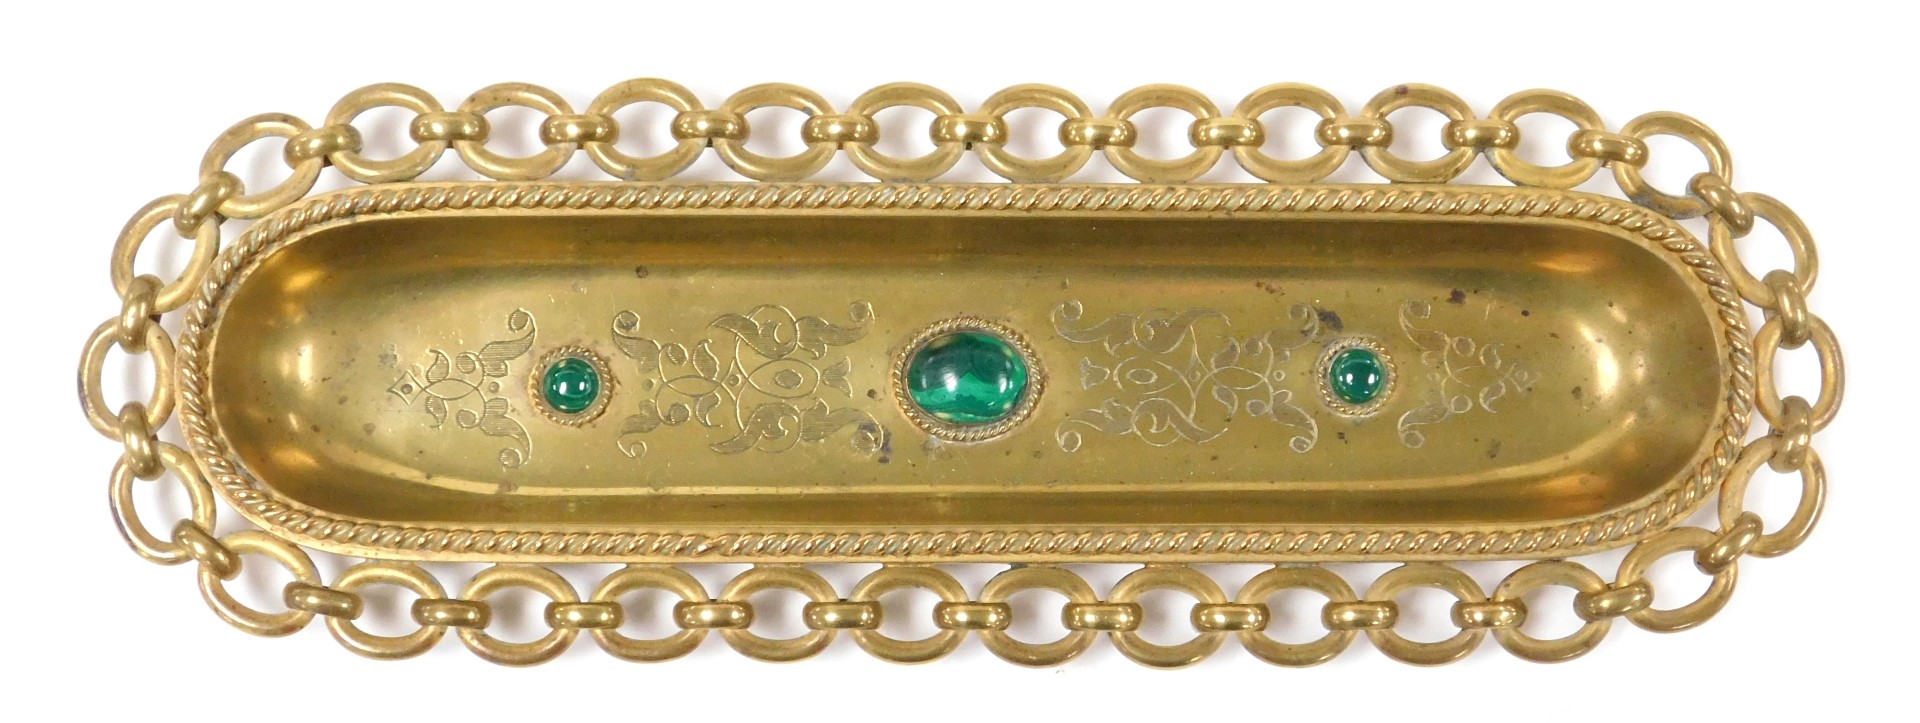 A Victorian brass desk set, inset with malachite cabochons, engraved with foliate decoration, and a - Image 2 of 5